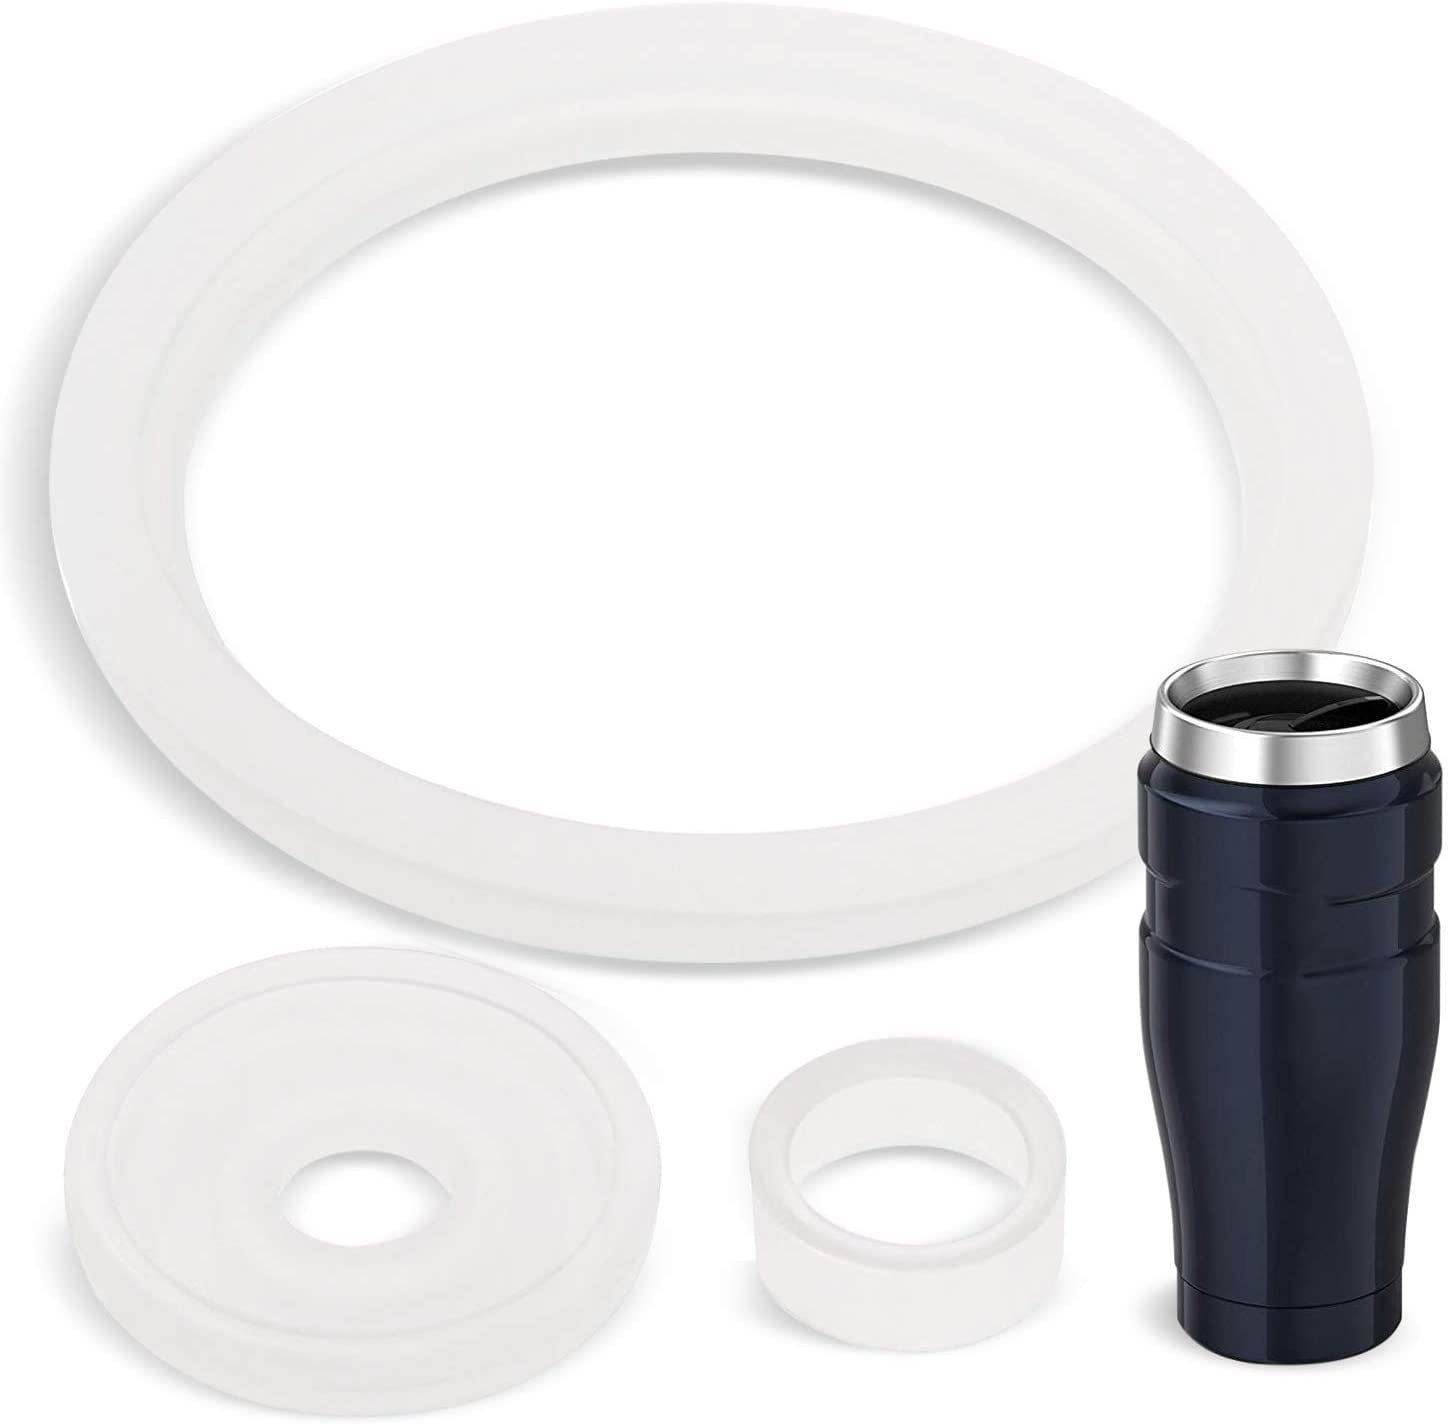 Thermos Stainless King (TM) 2-Sets compatible 16 Ounce Travel Tumbler/Mug  Gaskets /Seals